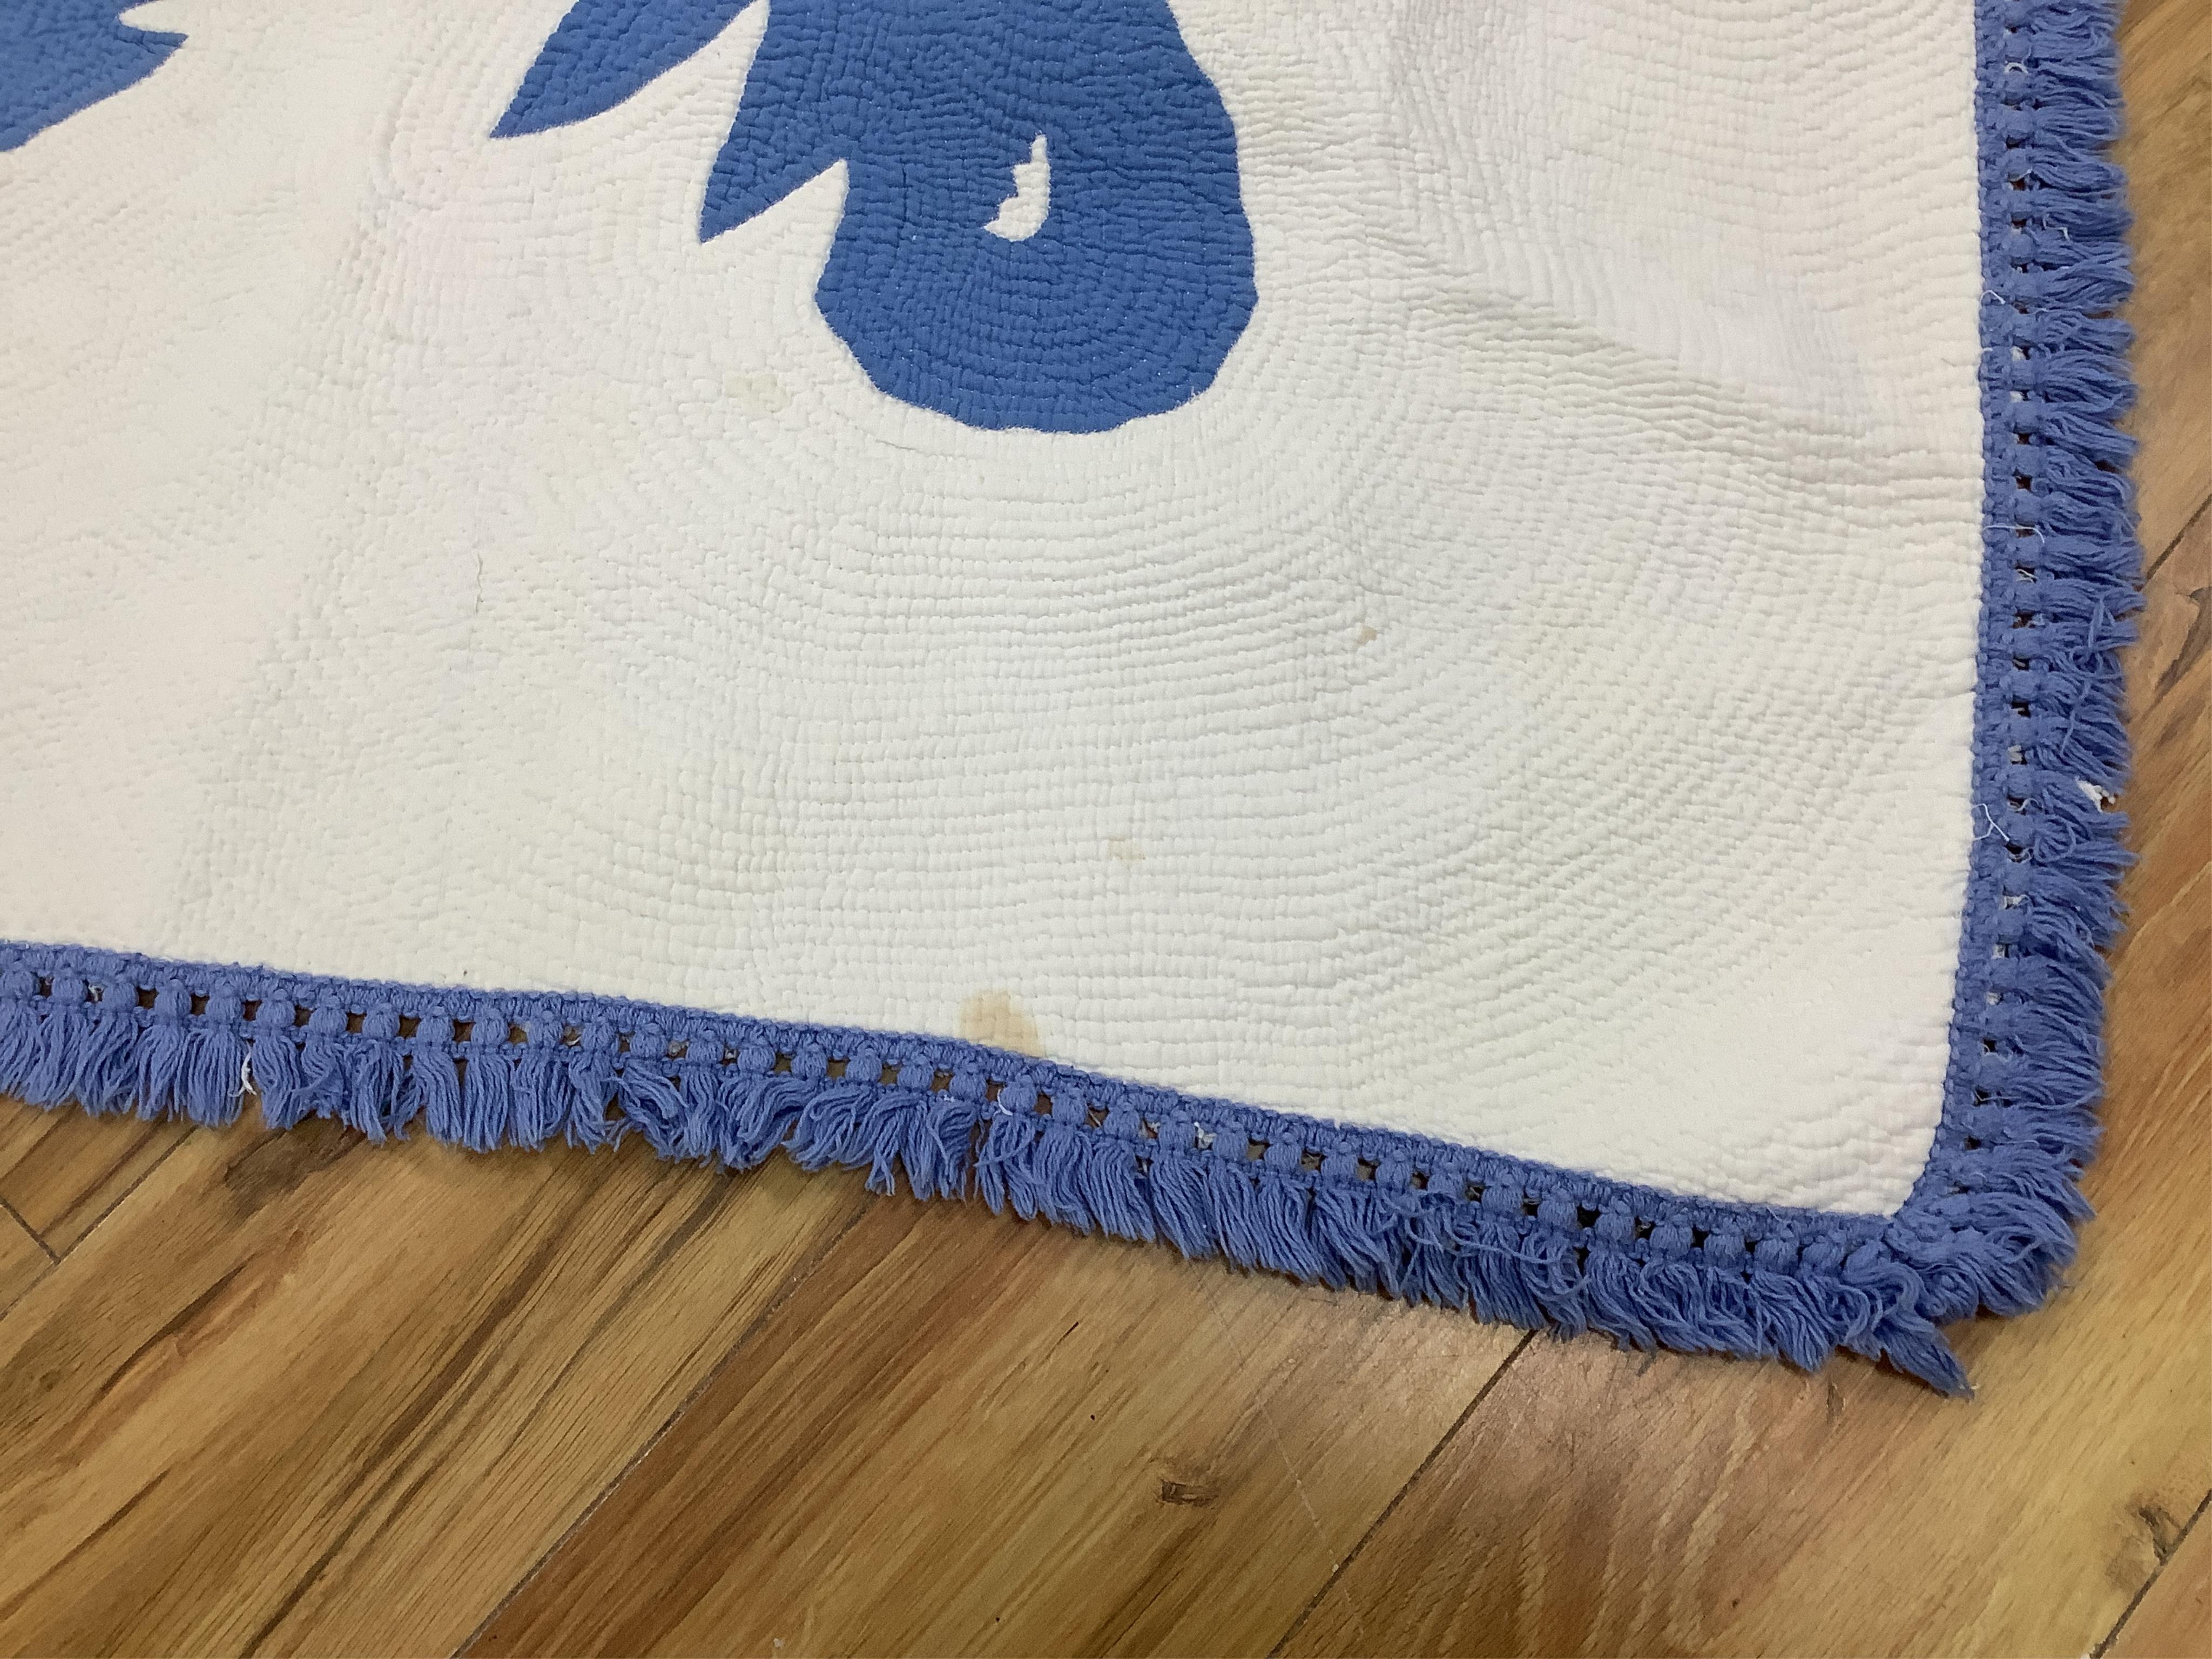 An American blue and white fringed bedcover (quilt)